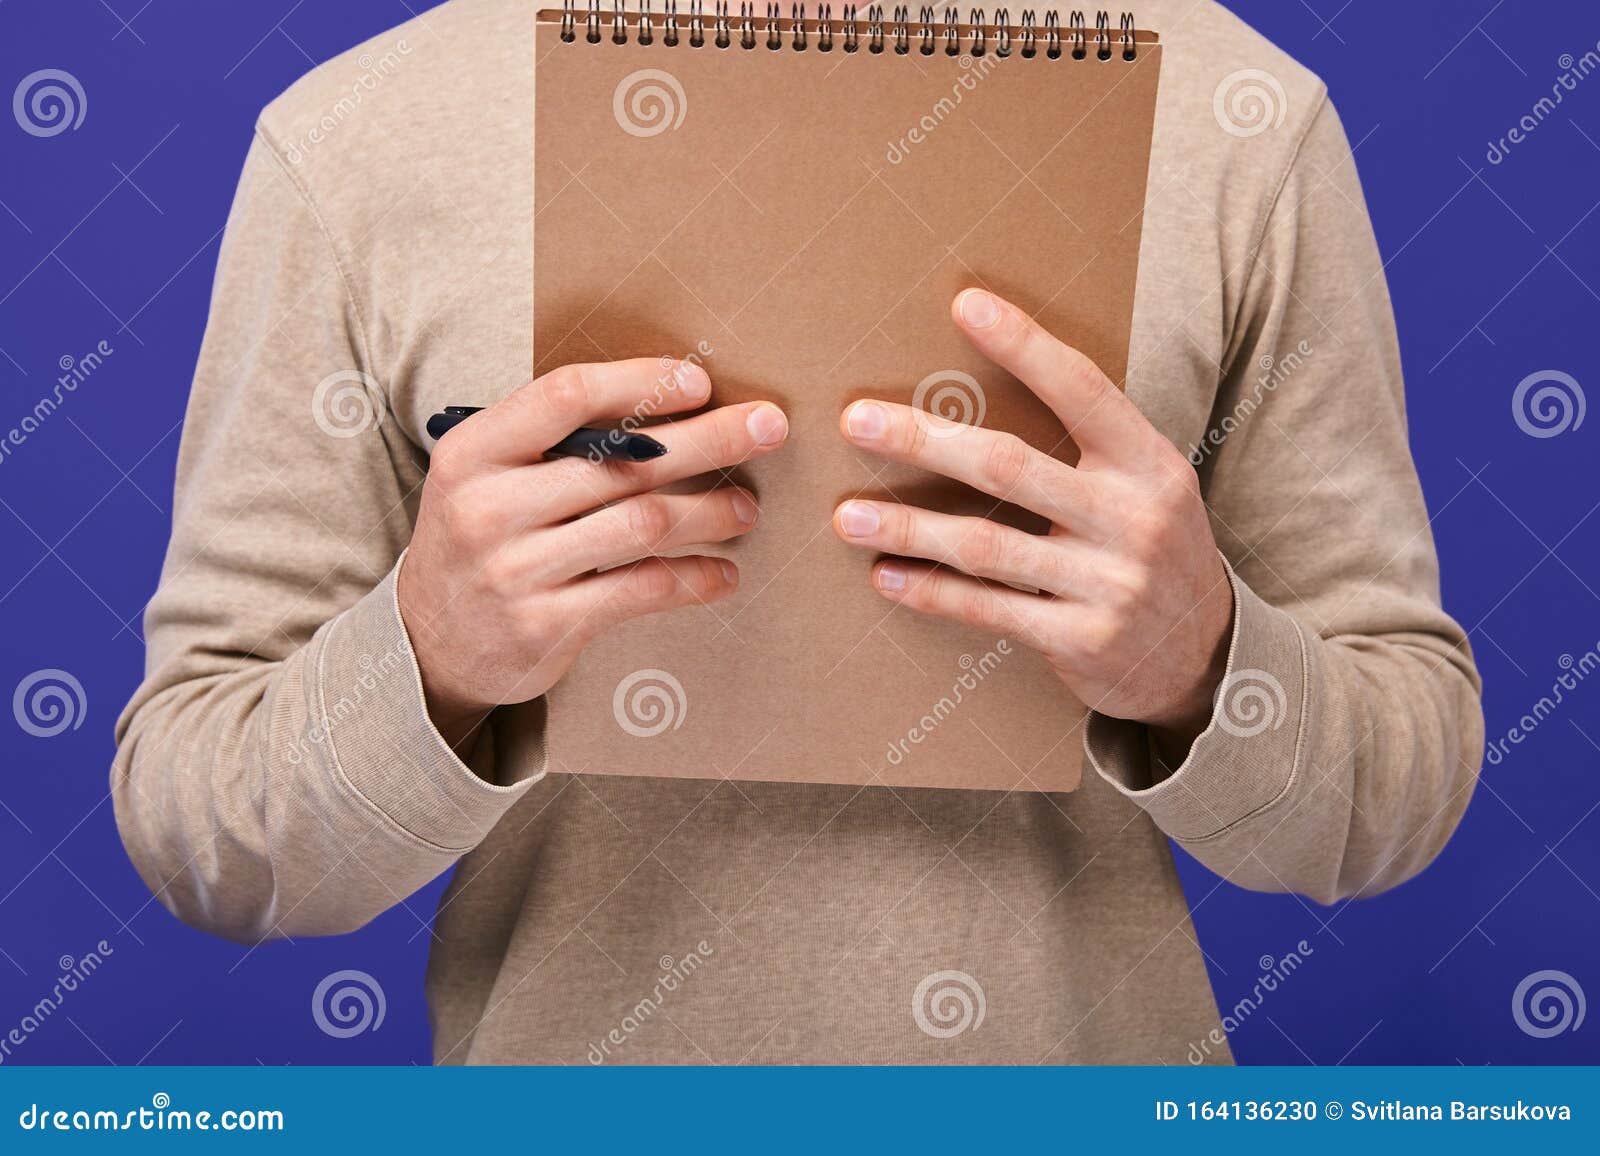 the guy`s hands holding ballpoint pen and brown draft notebook